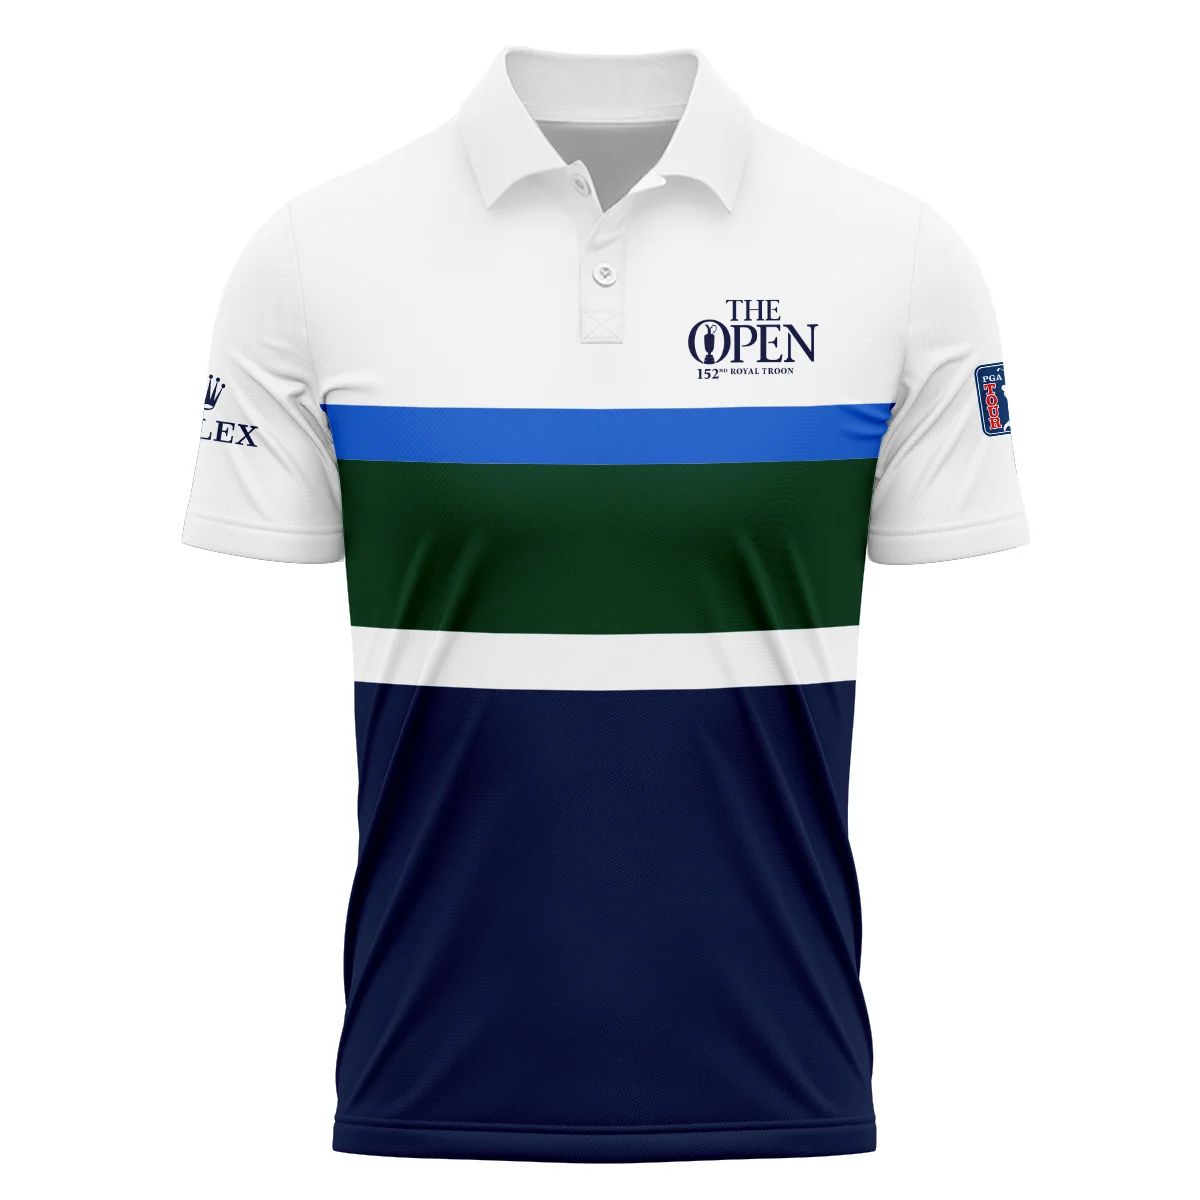 White Blue Green Background Rolex 152nd Open Championship Zipper Polo Shirt All Over Prints HOTOP270624A01ROXZPL